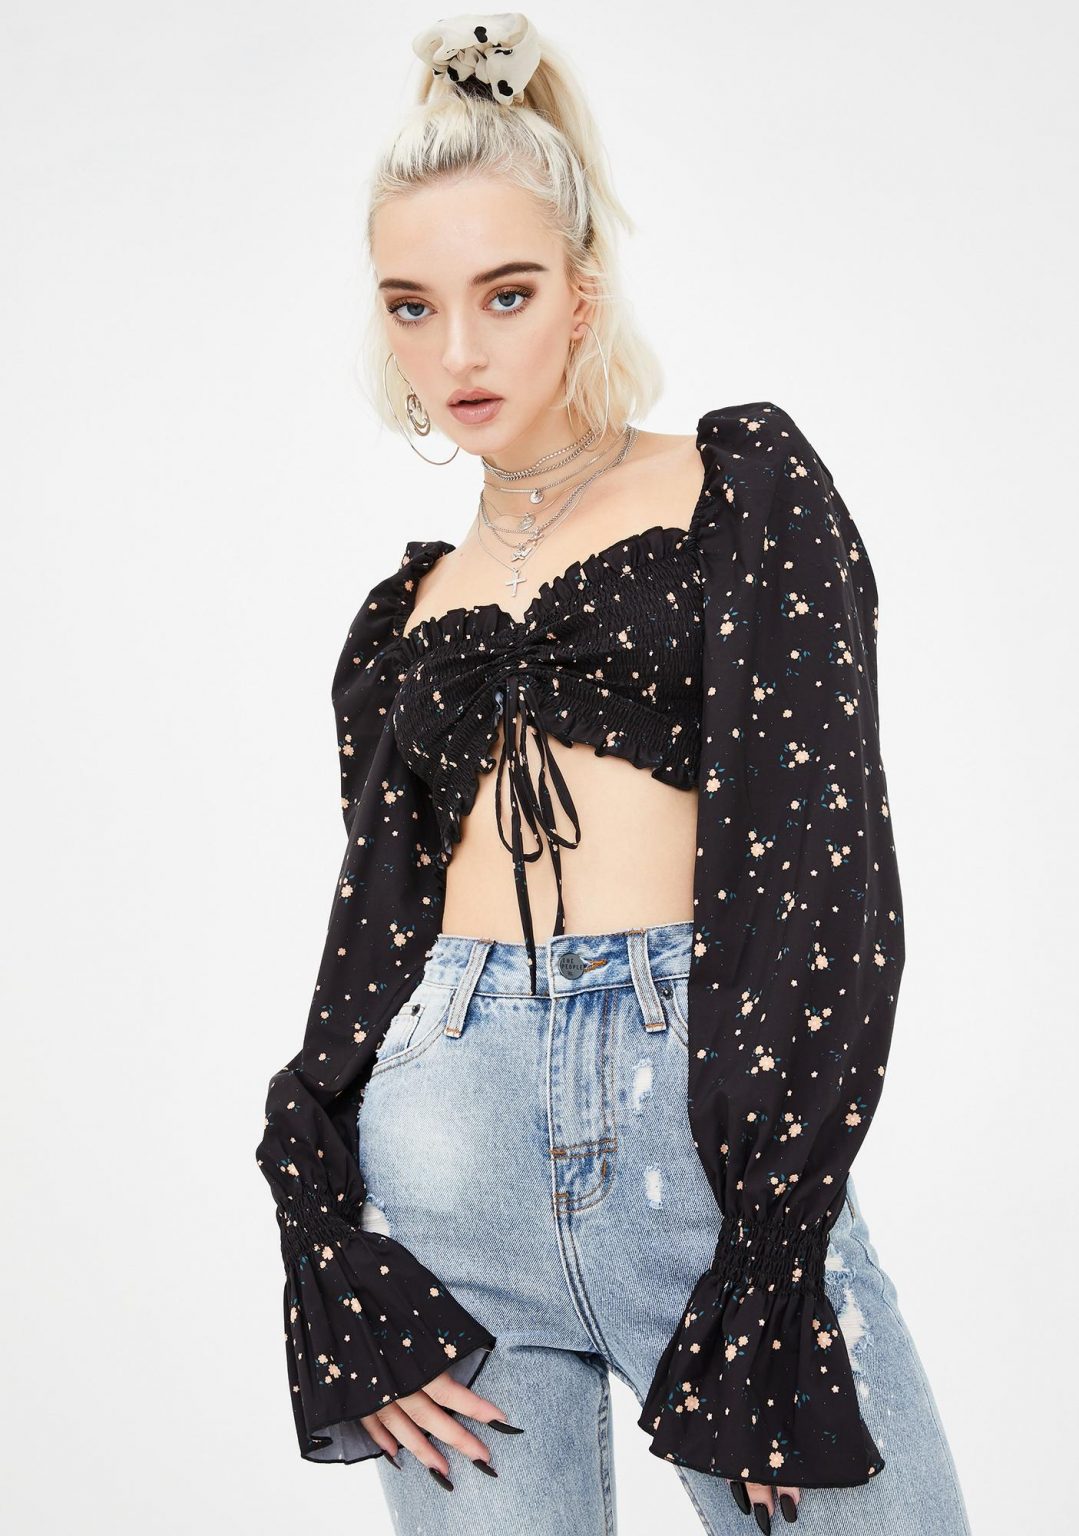 6 Crop Top Trends To Try This Summer Bnsds Fashion World